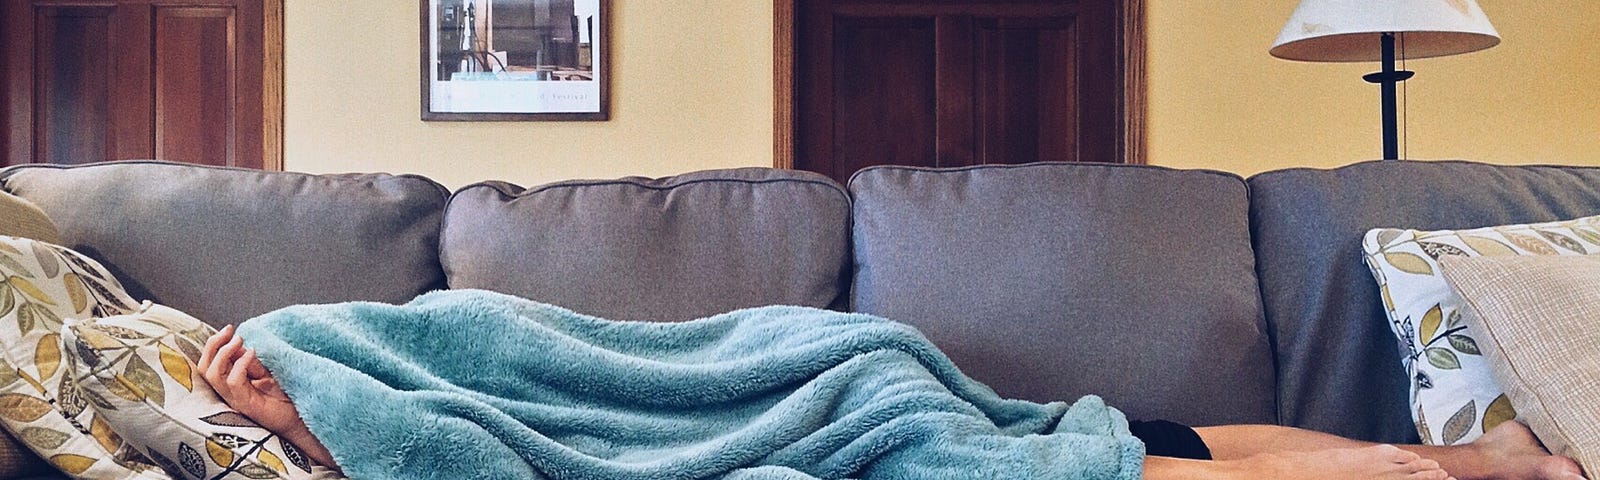 Photo of person laying on the couch covered in a blanket.